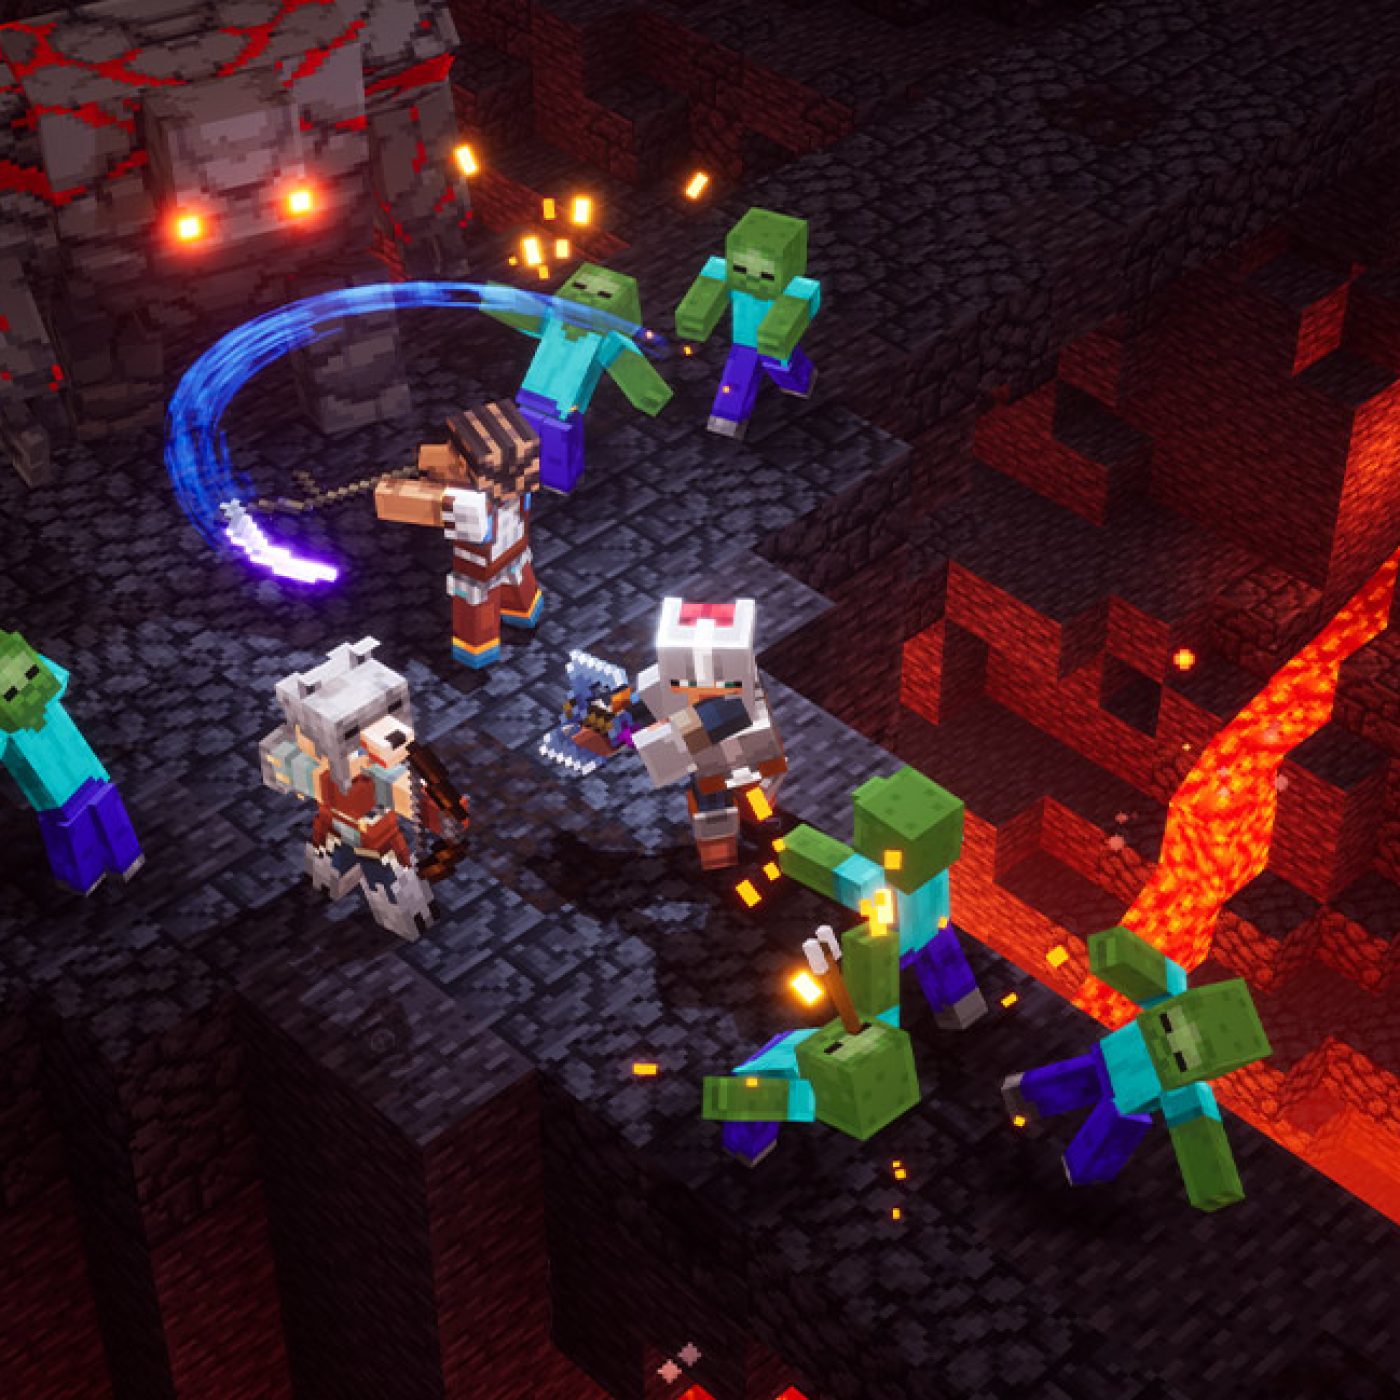 Xbox aims for another hit with 'Minecraft Dungeons' launch